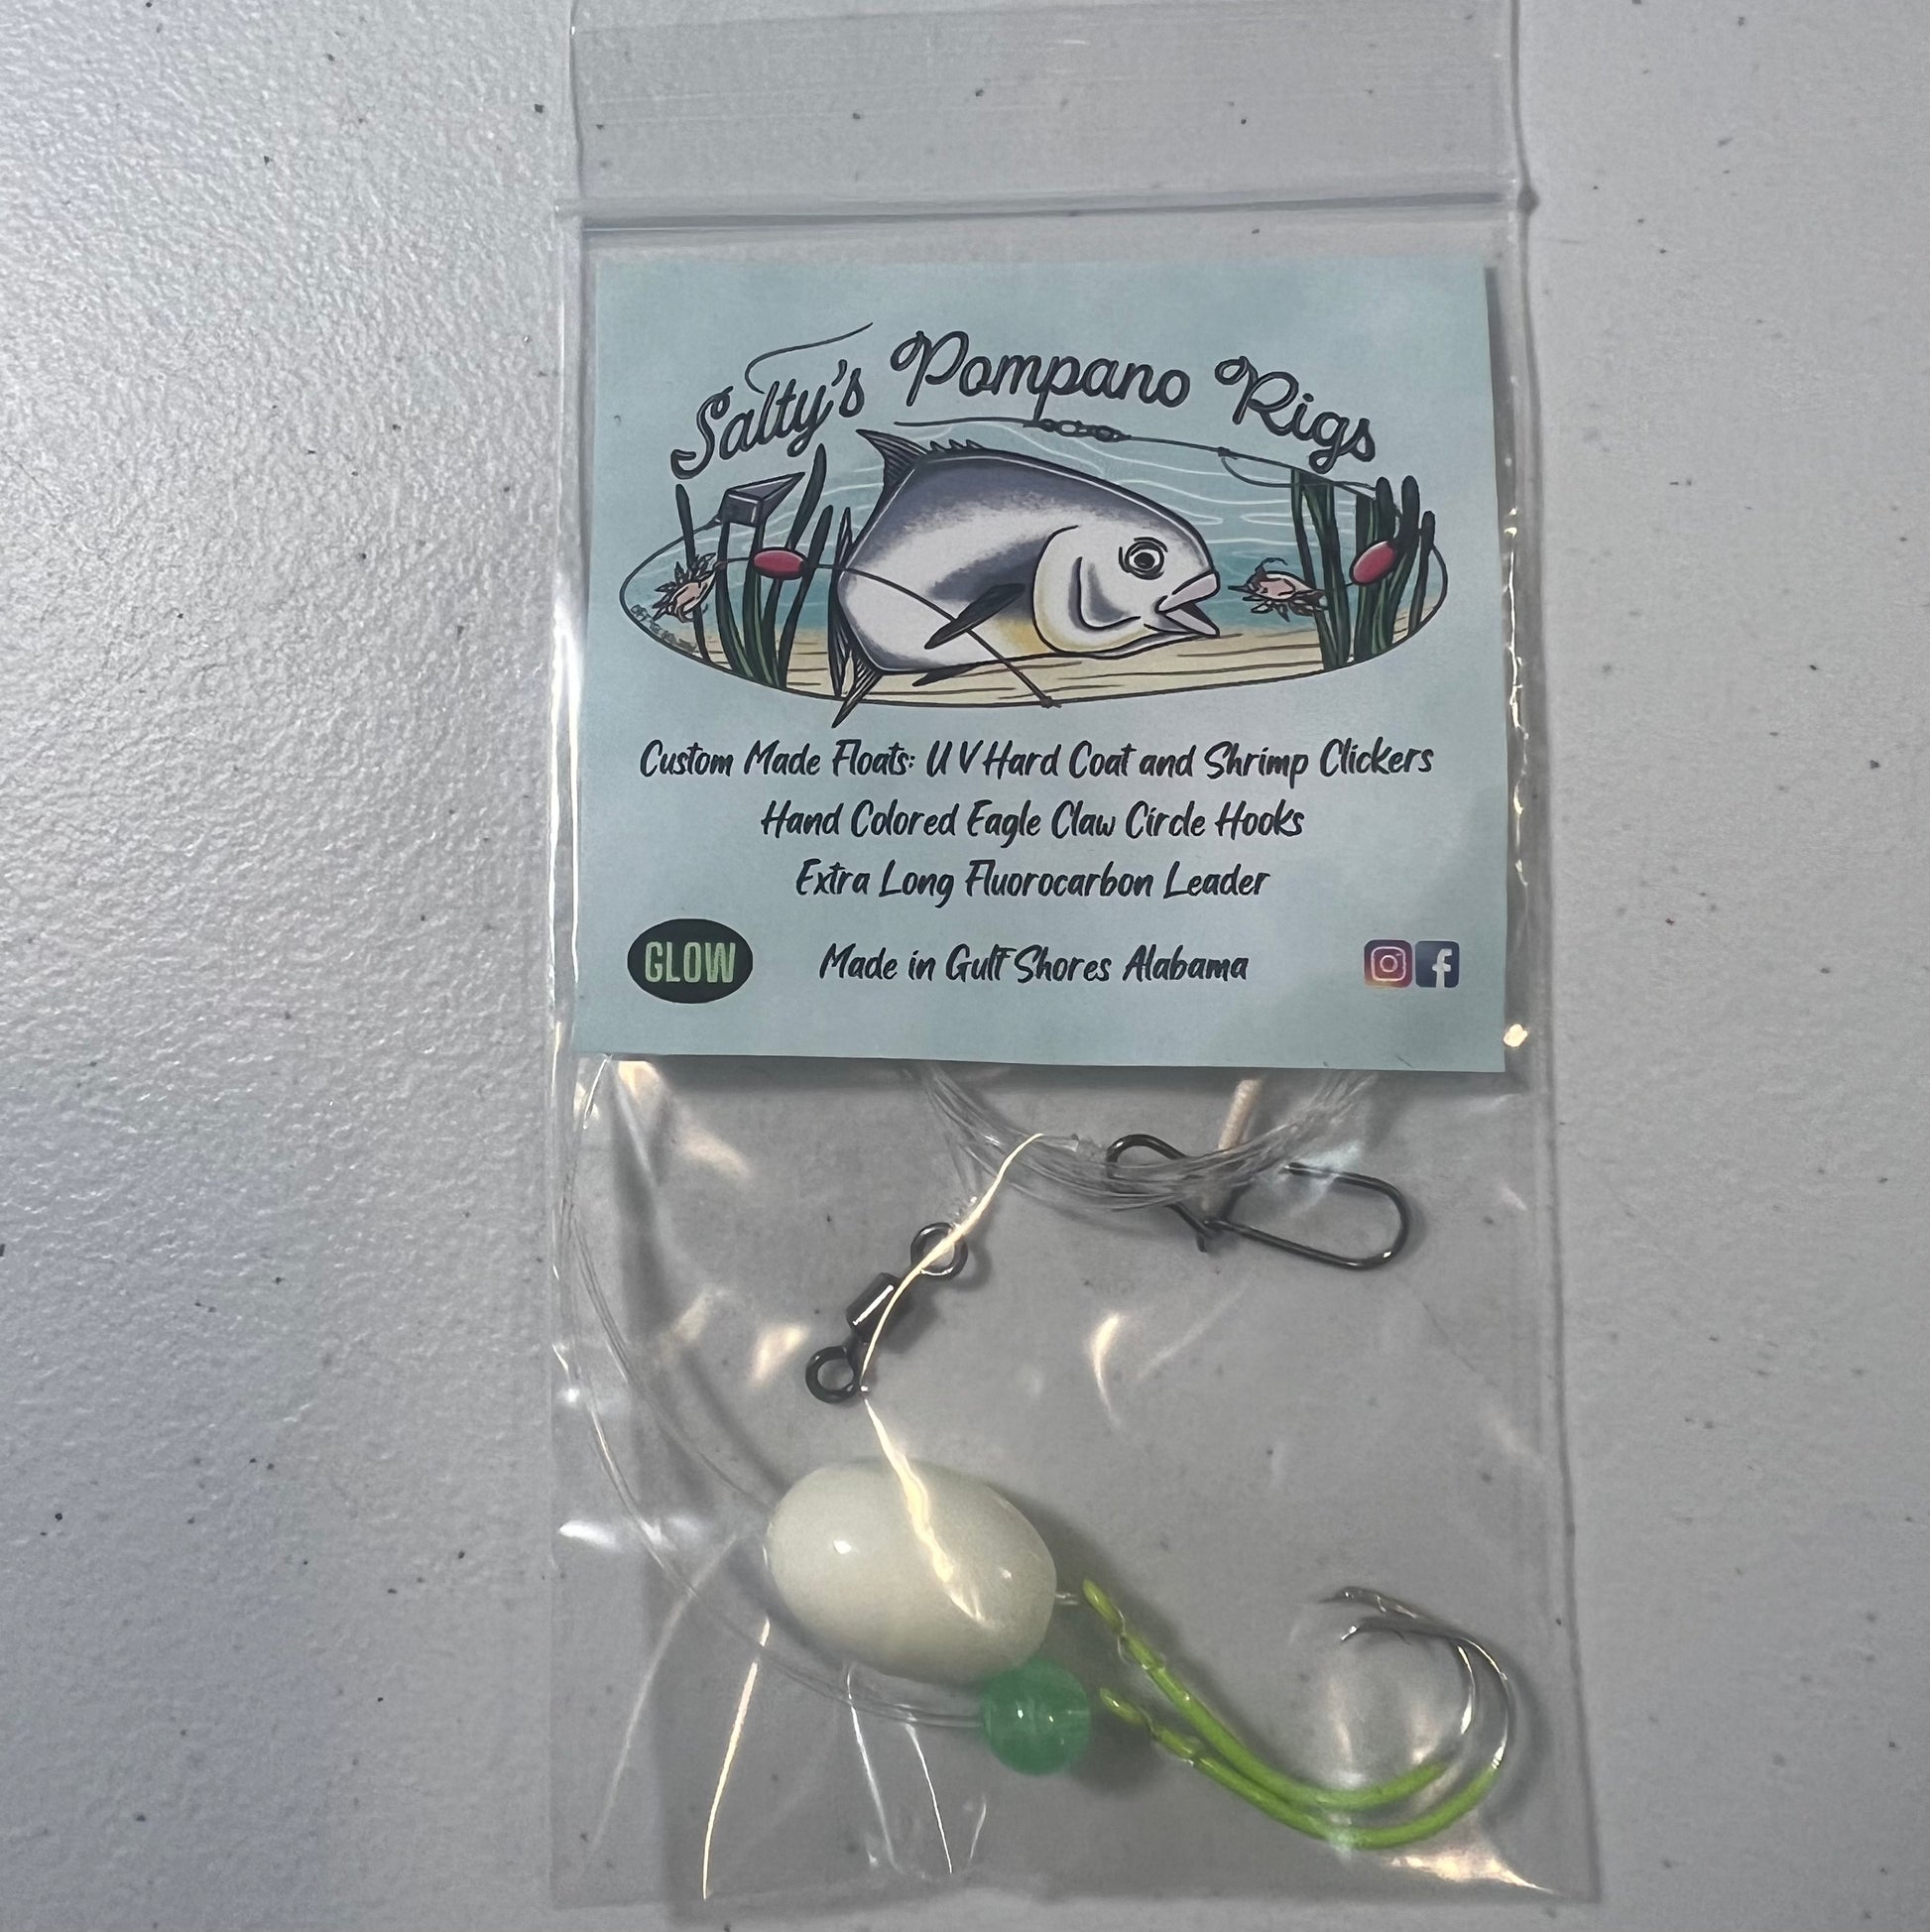 3 Pack '#1' Pompano Rig Surf Fishing Hi-Lo Double Drop Hand-Tied 25LB Mono  (Chartreuse/Green)